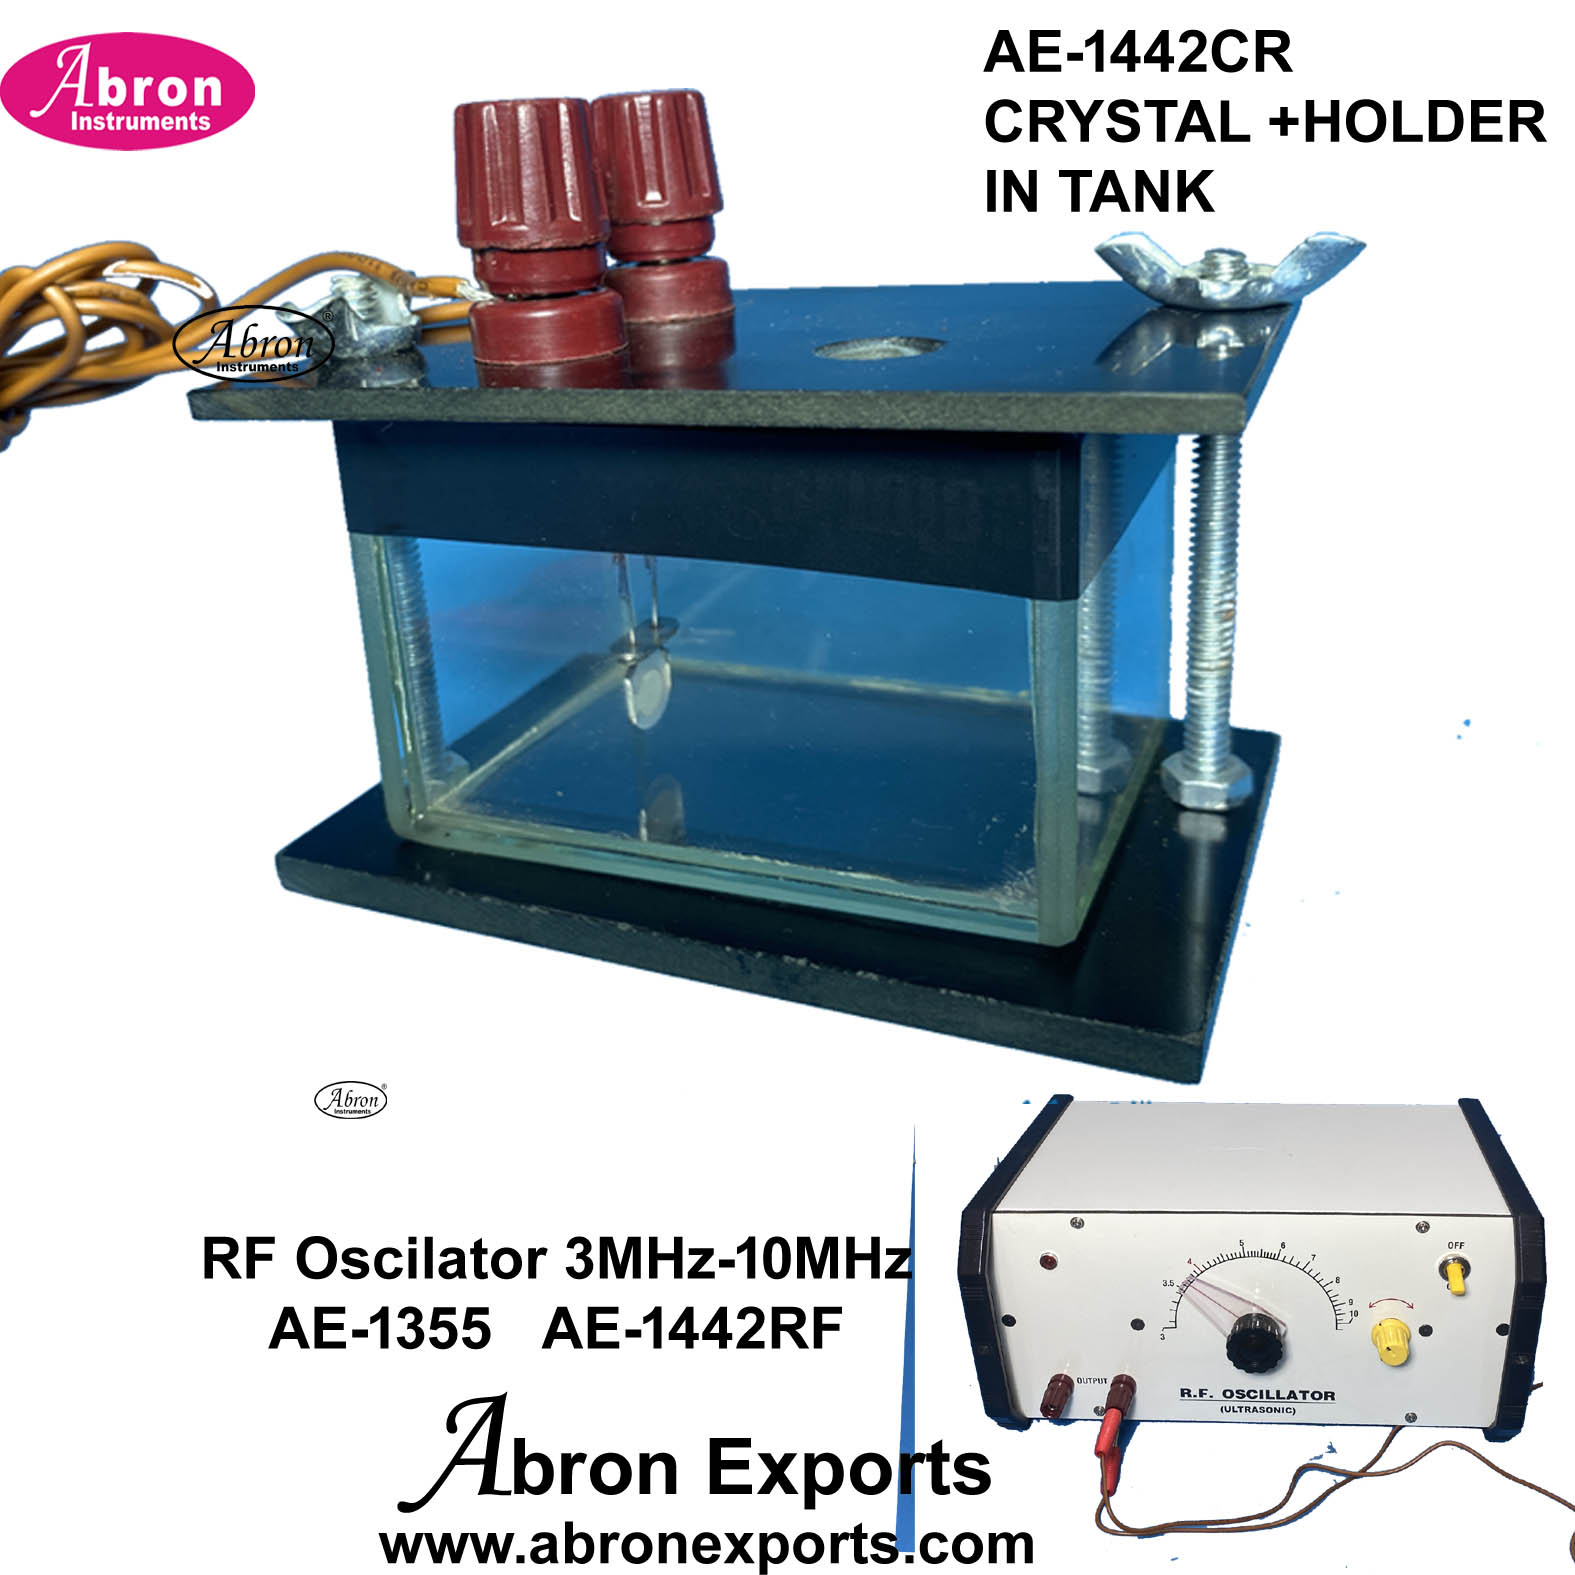 Ultrasonic diffraction experiment Crystal holder with tankned RF oscillator abron AE-1442RF AE-1442CR